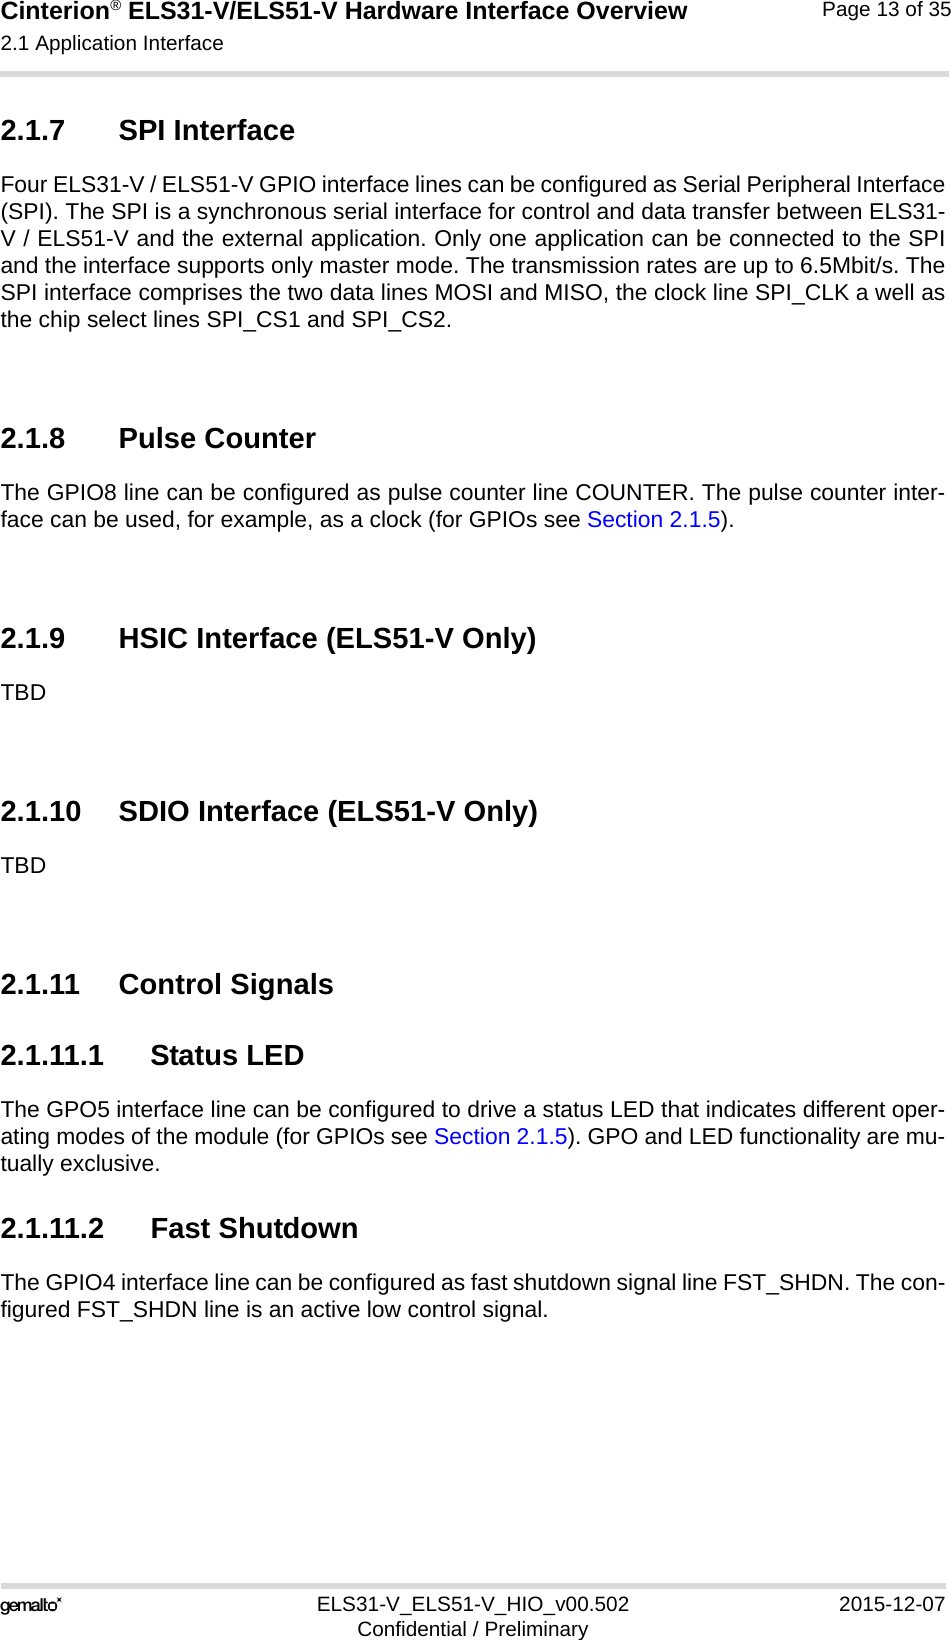 Cinterion® ELS31-V/ELS51-V Hardware Interface Overview2.1 Application Interface17ELS31-V_ELS51-V_HIO_v00.502 2015-12-07Confidential / PreliminaryPage 13 of 352.1.7 SPI InterfaceFour ELS31-V / ELS51-V GPIO interface lines can be configured as Serial Peripheral Interface(SPI). The SPI is a synchronous serial interface for control and data transfer between ELS31-V / ELS51-V and the external application. Only one application can be connected to the SPIand the interface supports only master mode. The transmission rates are up to 6.5Mbit/s. TheSPI interface comprises the two data lines MOSI and MISO, the clock line SPI_CLK a well asthe chip select lines SPI_CS1 and SPI_CS2.2.1.8 Pulse CounterThe GPIO8 line can be configured as pulse counter line COUNTER. The pulse counter inter-face can be used, for example, as a clock (for GPIOs see Section 2.1.5). 2.1.9 HSIC Interface (ELS51-V Only)TBD2.1.10 SDIO Interface (ELS51-V Only)TBD2.1.11 Control Signals2.1.11.1 Status LEDThe GPO5 interface line can be configured to drive a status LED that indicates different oper-ating modes of the module (for GPIOs see Section 2.1.5). GPO and LED functionality are mu-tually exclusive.2.1.11.2 Fast ShutdownThe GPIO4 interface line can be configured as fast shutdown signal line FST_SHDN. The con-figured FST_SHDN line is an active low control signal. 